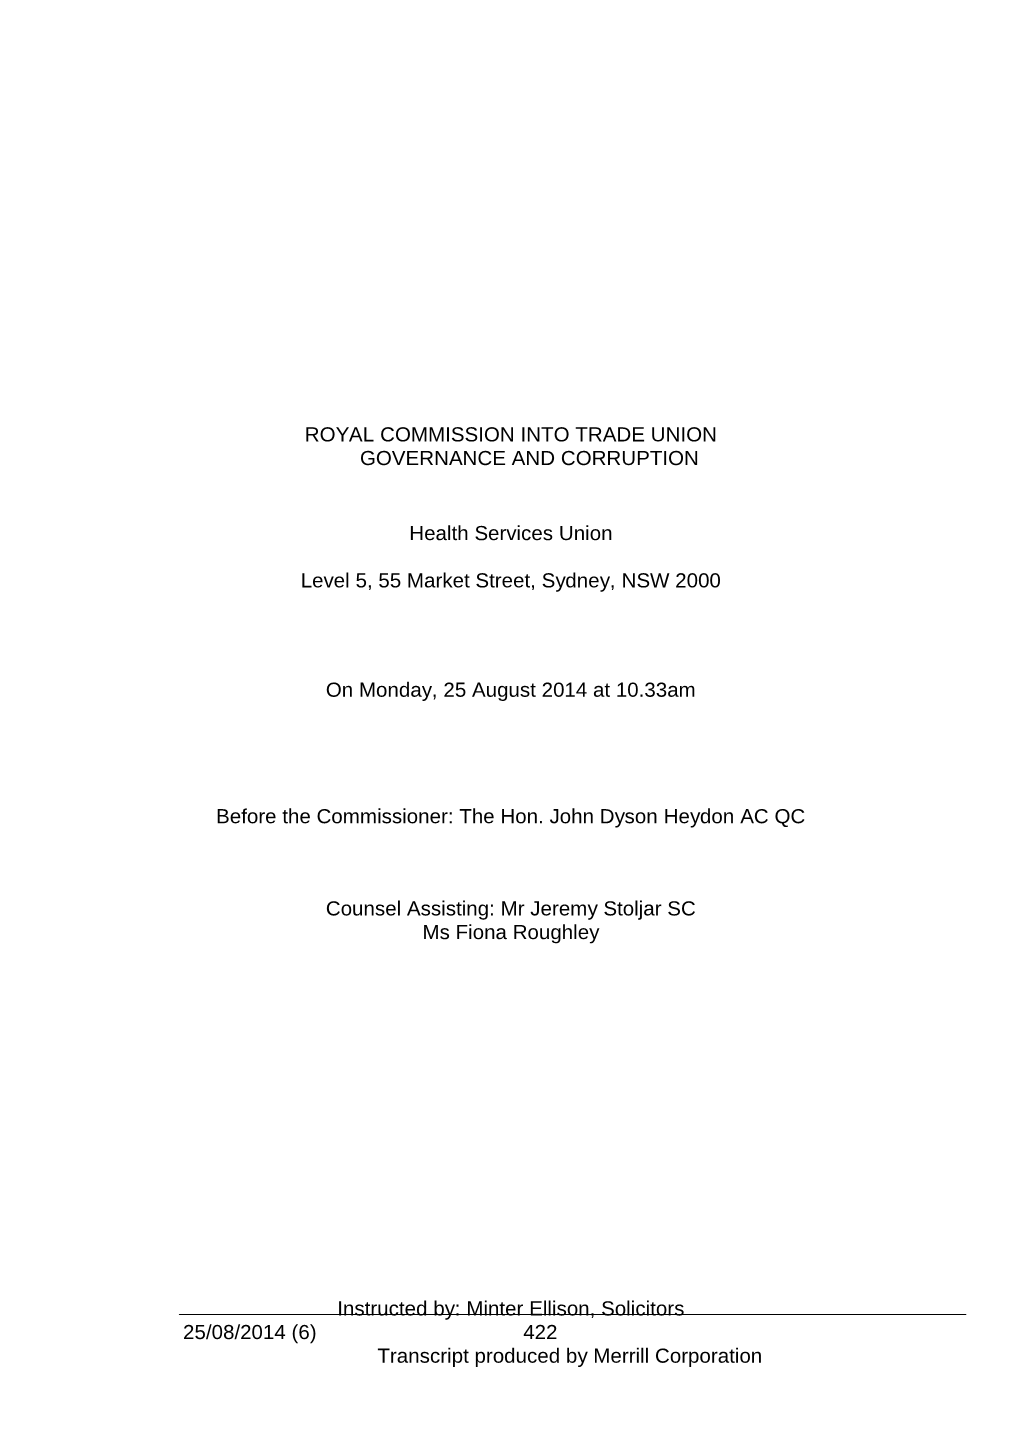 Royal Commission Into Trade Union Governance and Corruption Health Services Union 25 August 2014